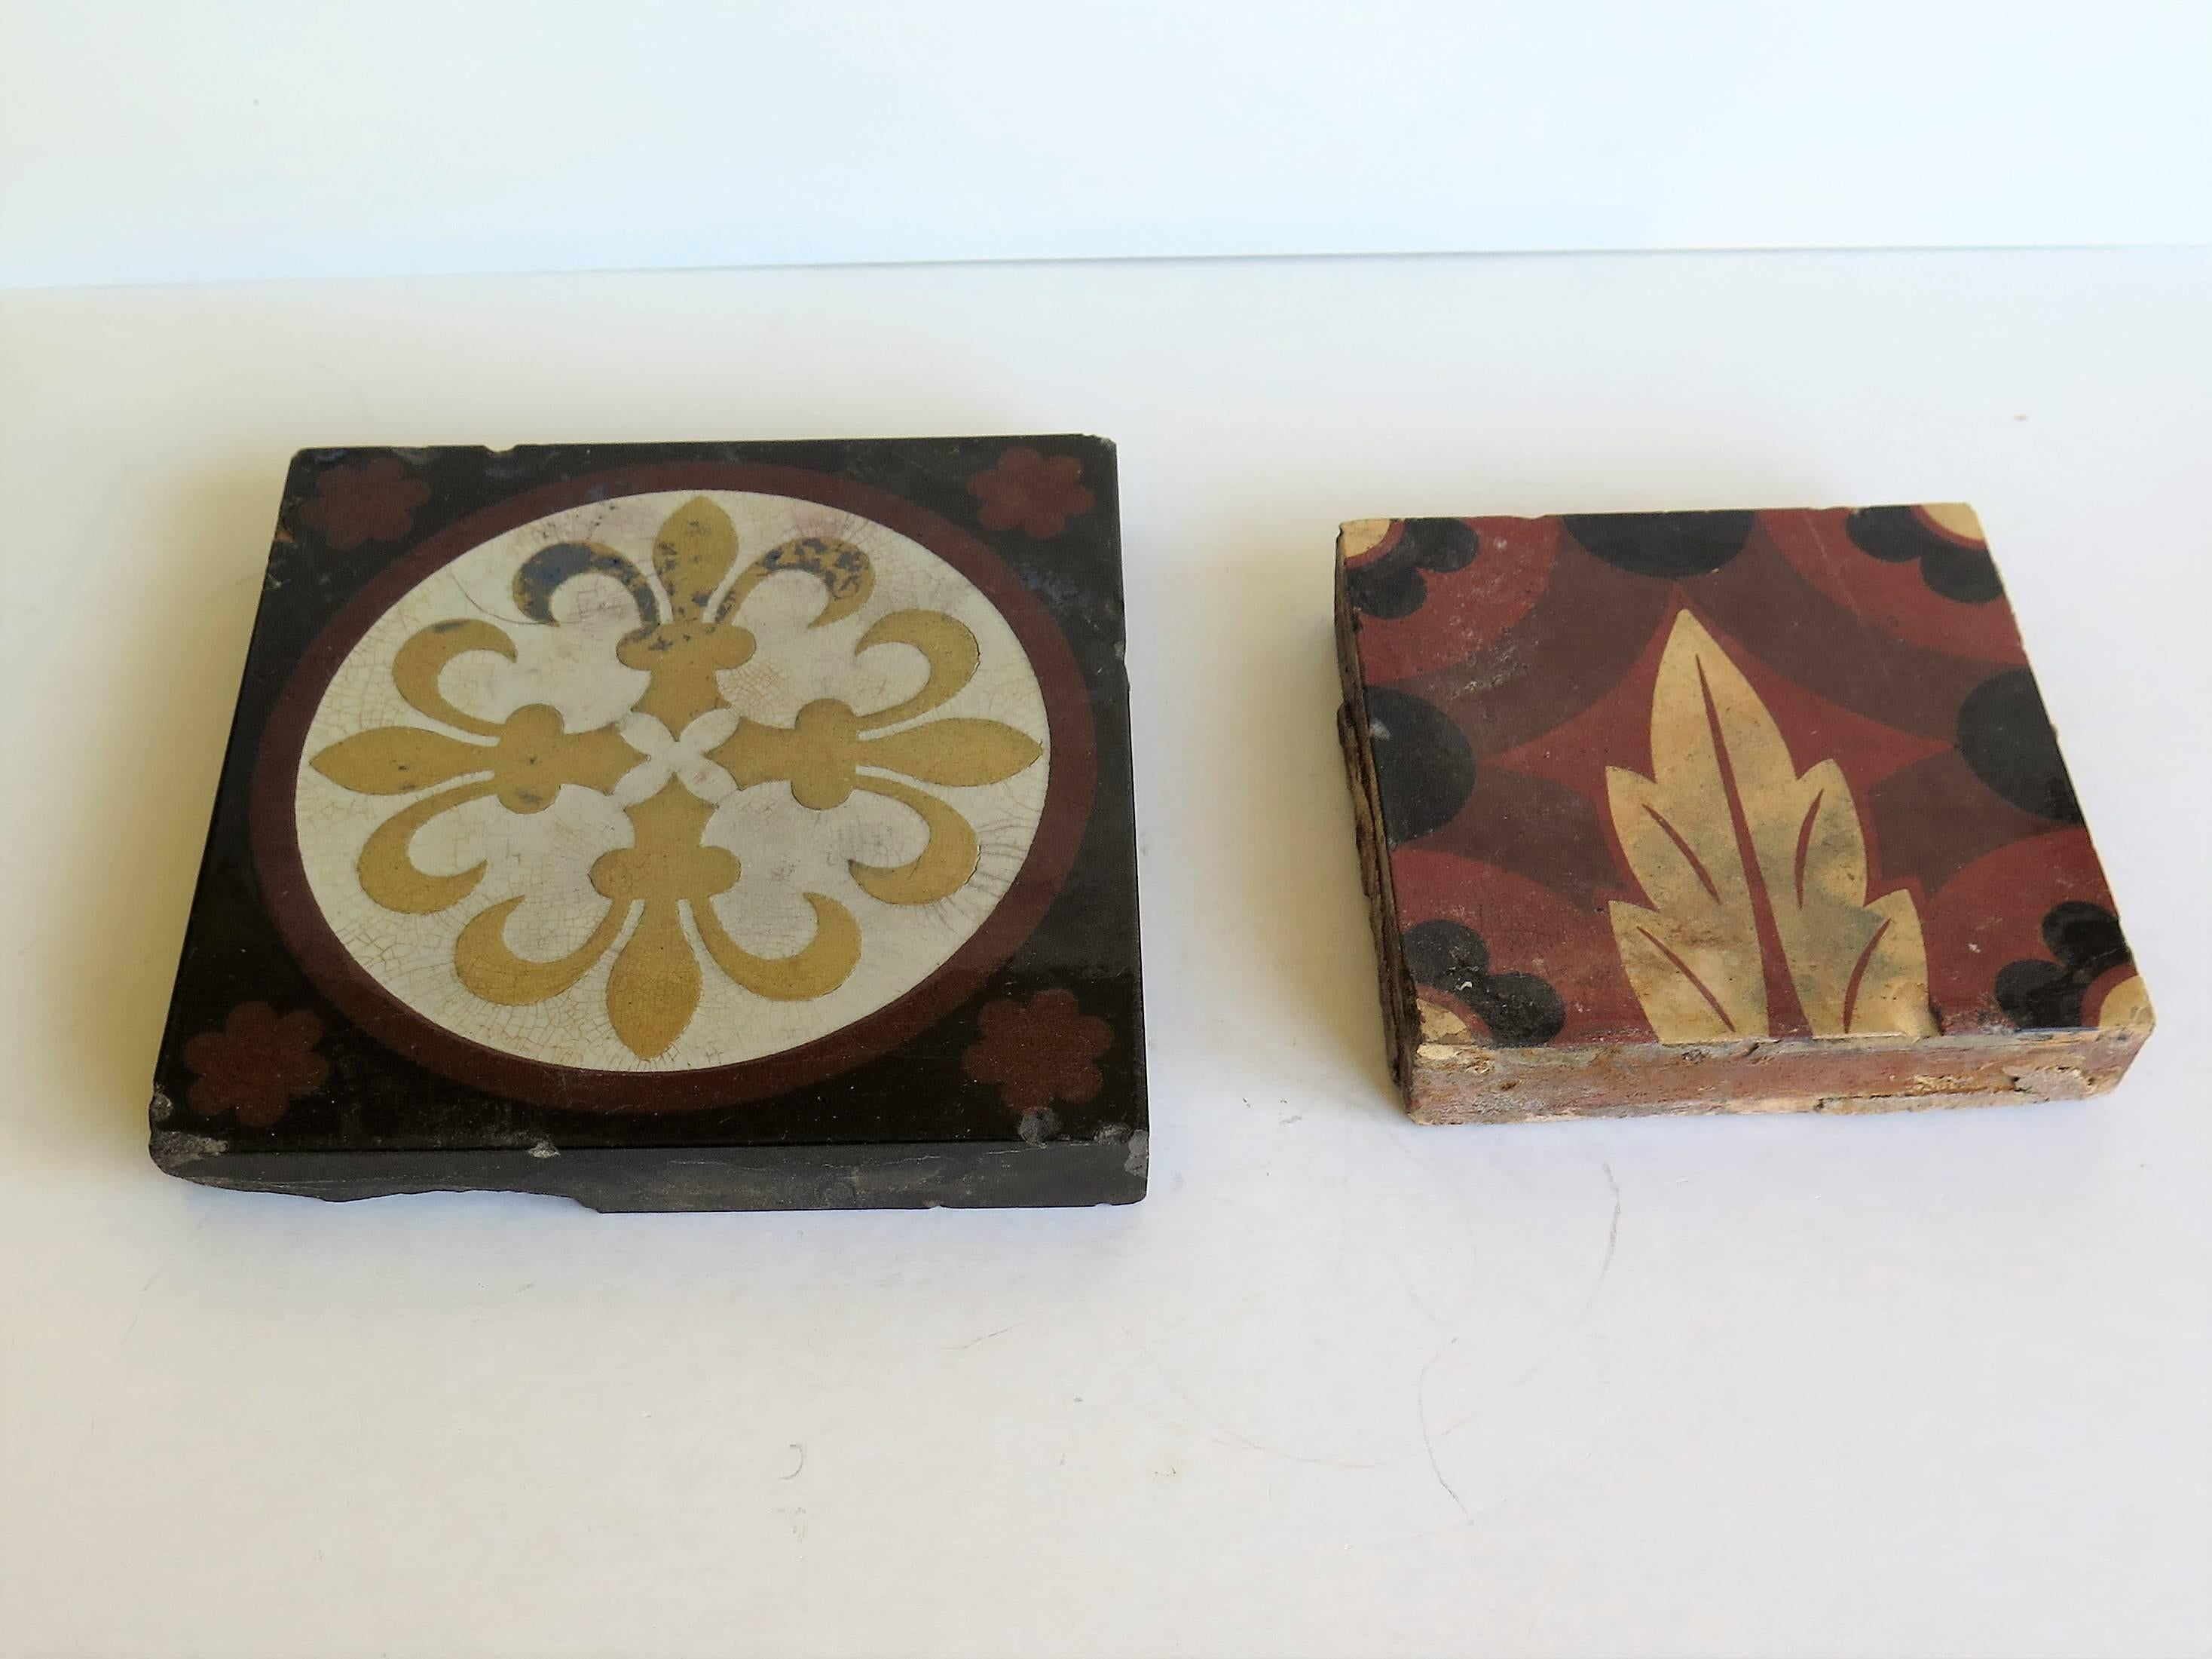 These are TWO decorative encaustic tiles from two different makers, dating to the 19th century, circa 1870. They were probably originally made as floor tiles. 

LARGER TILE: Dimensions; 6 x 6 x 0.85 inches
This larger tile is a beautiful pressed